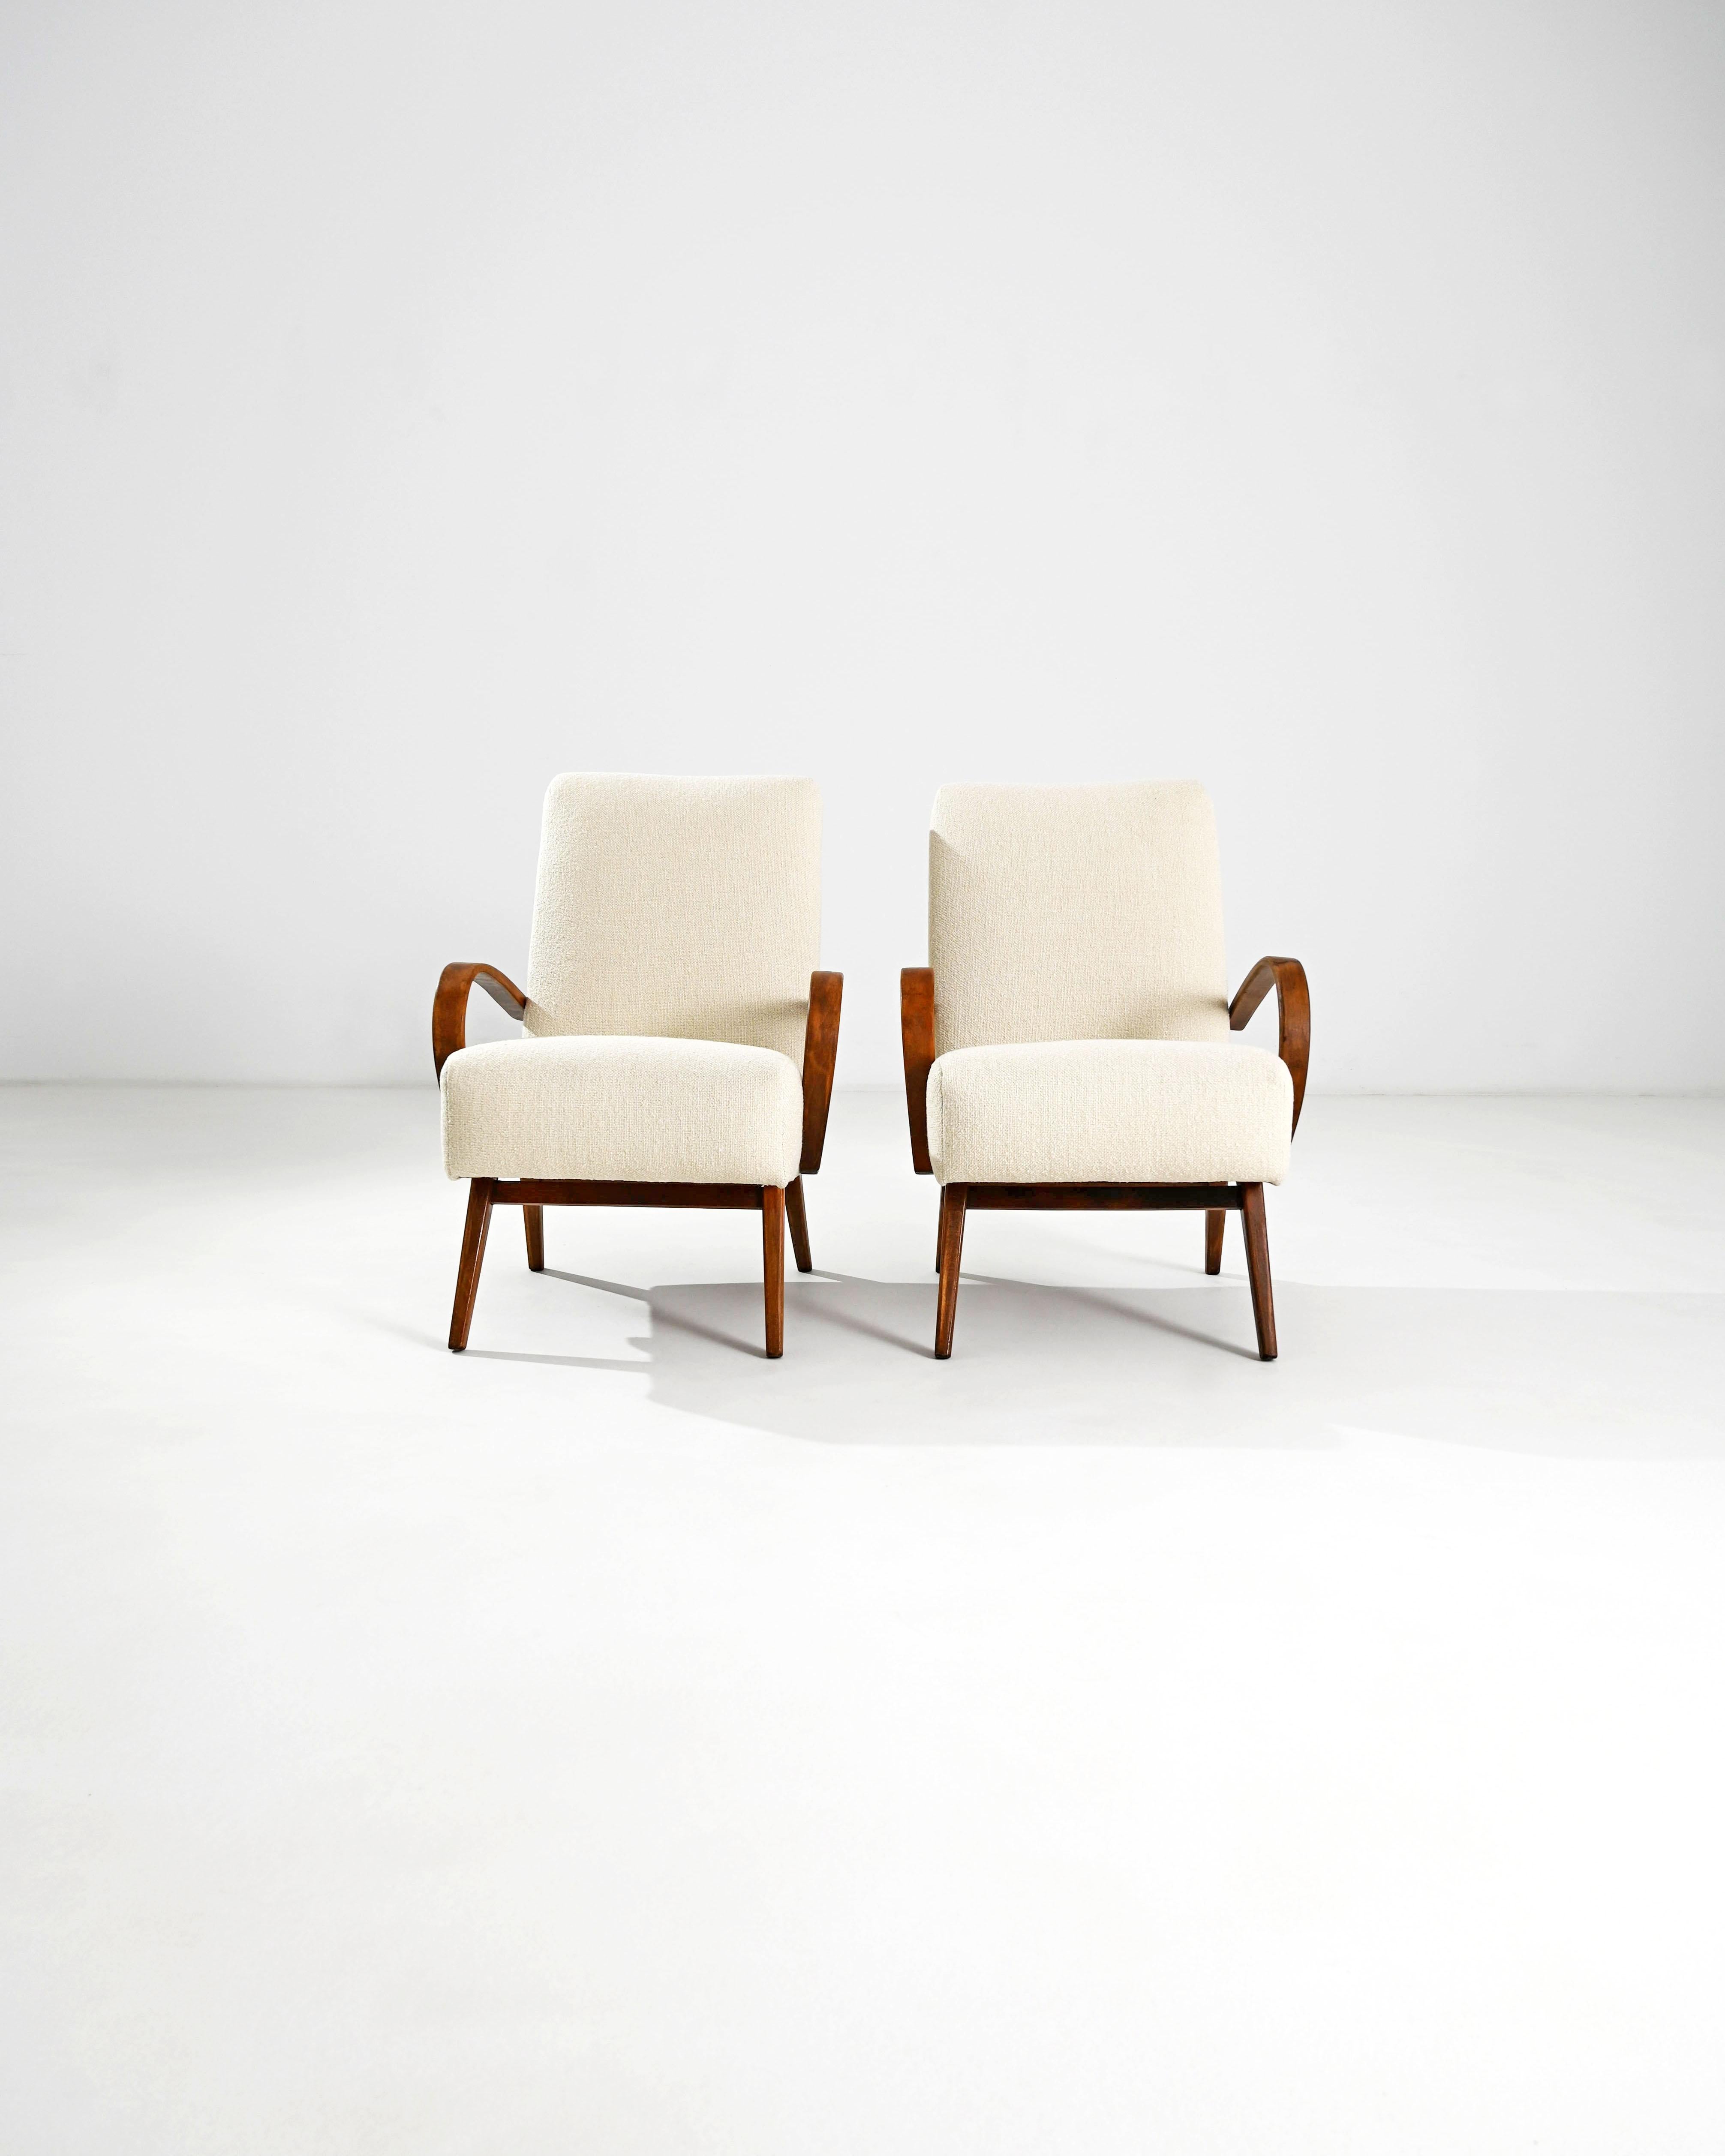 Produced in the former Czechoslovakia, this pair of bentwood armchairs from circa 1950 are re-upholstered with an updated cream boucle fabric. The cotton-linen blend was chosen to compliment the vintage elegance of the polished hardwood frame.